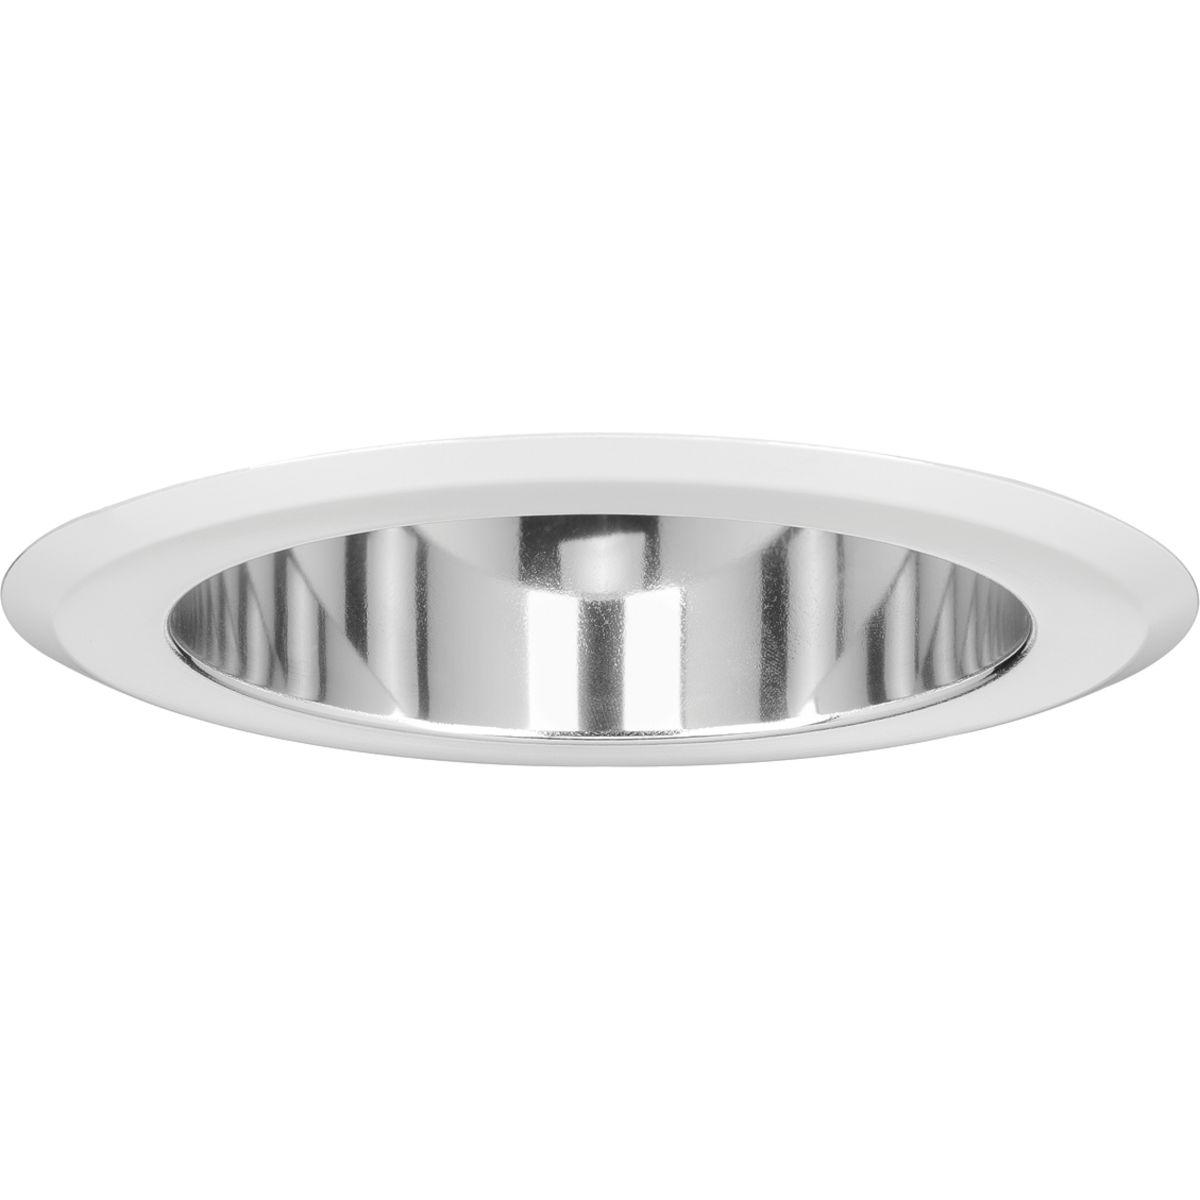 Hubbell P8268-21 5” Deep Open Trim in a Clear Alzak finish in the 5" trim family for use in recessed downlighting. UL and CUL listed for damp locations. The trim uses friction springs to attach to the housing to provide a flush fit against the ceiling. Compatible for use 